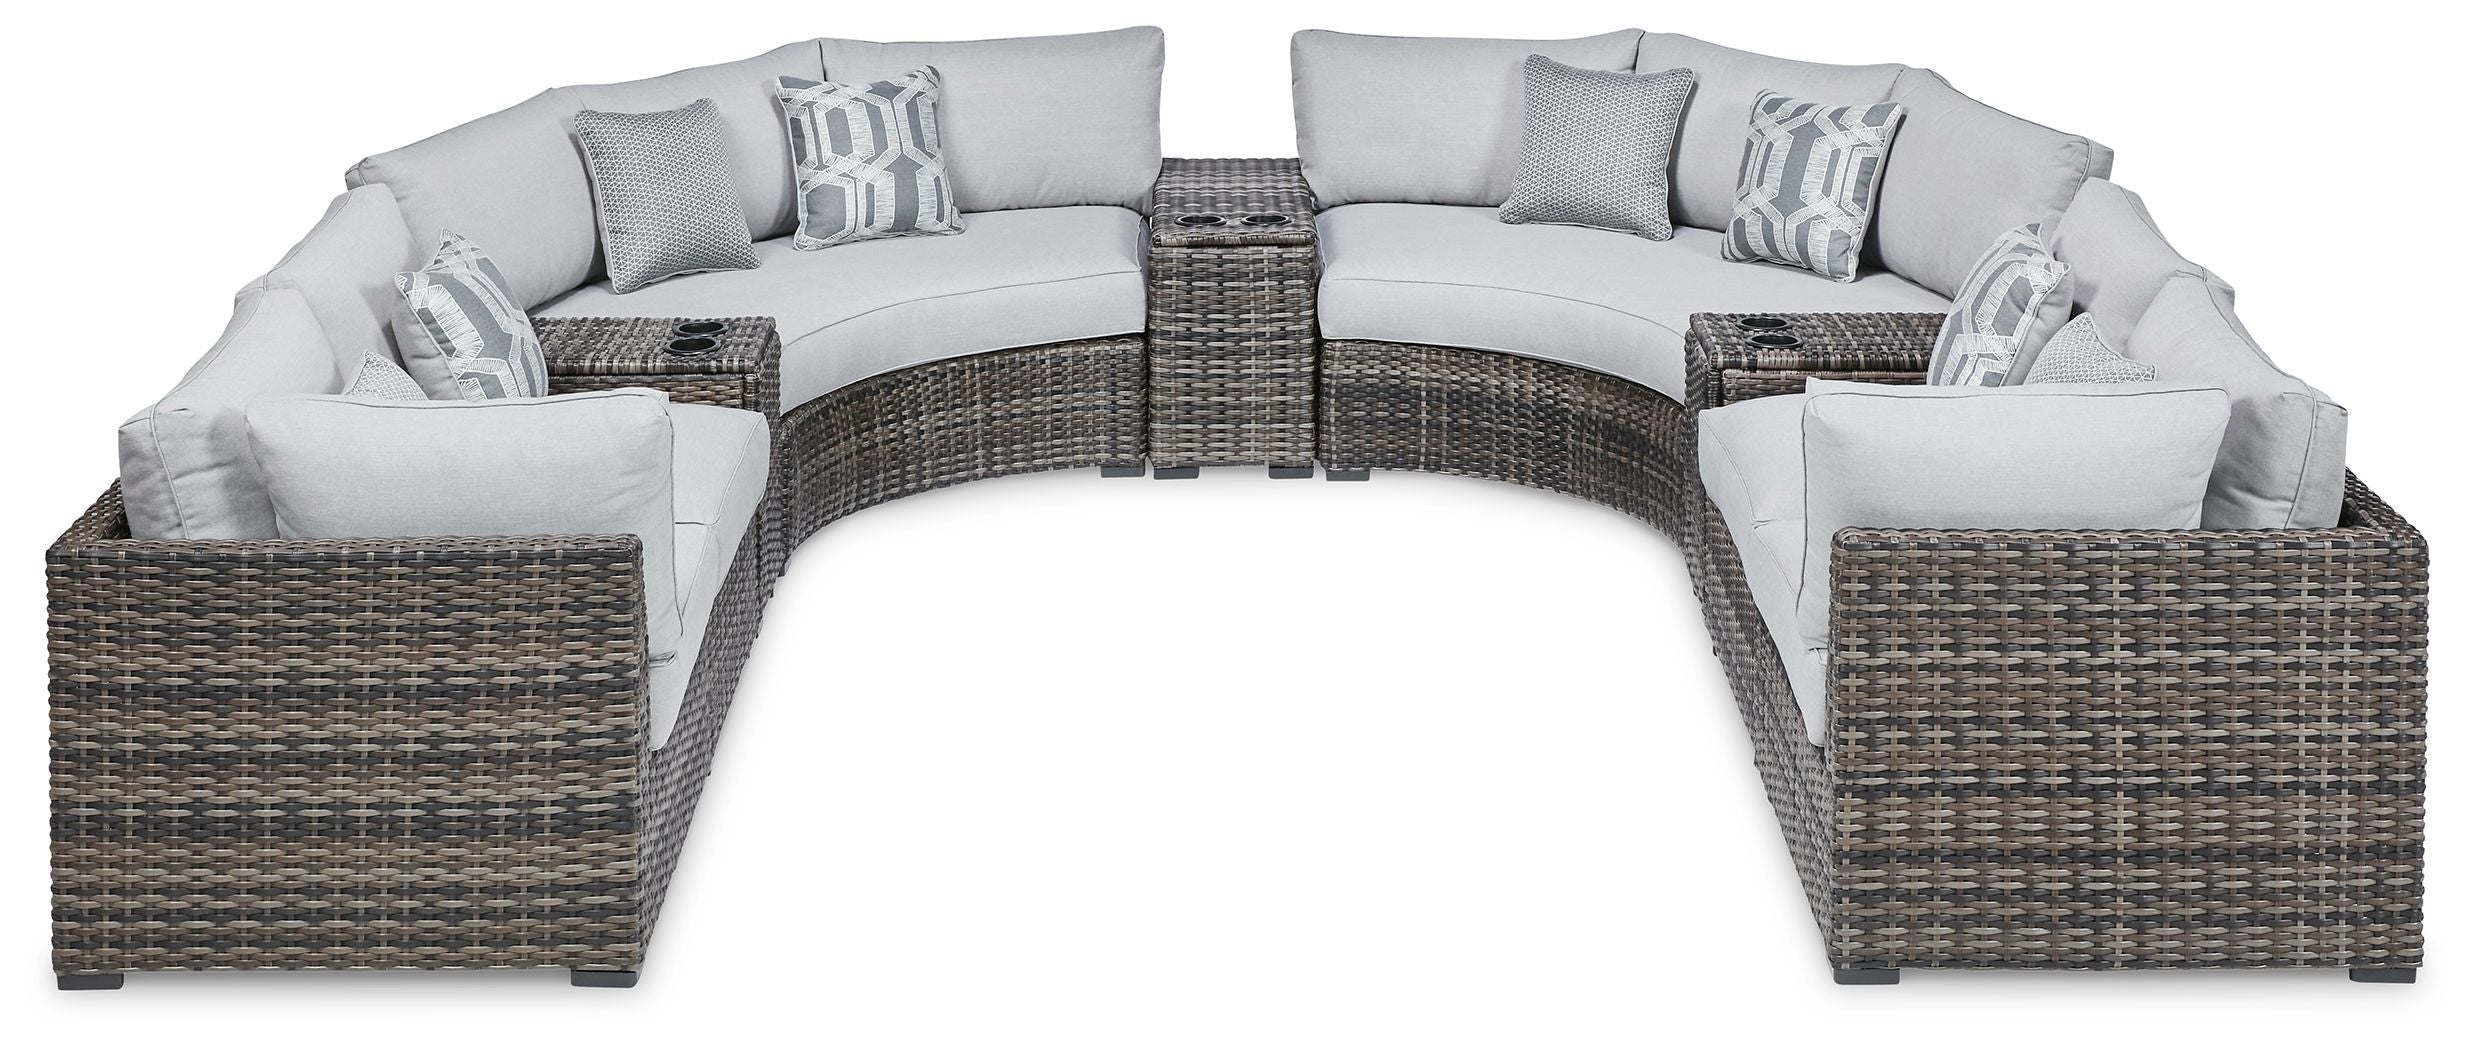 Harbor Court - Gray - 9-Piece Outdoor Sectional-Stationary Sectionals-American Furniture Outlet